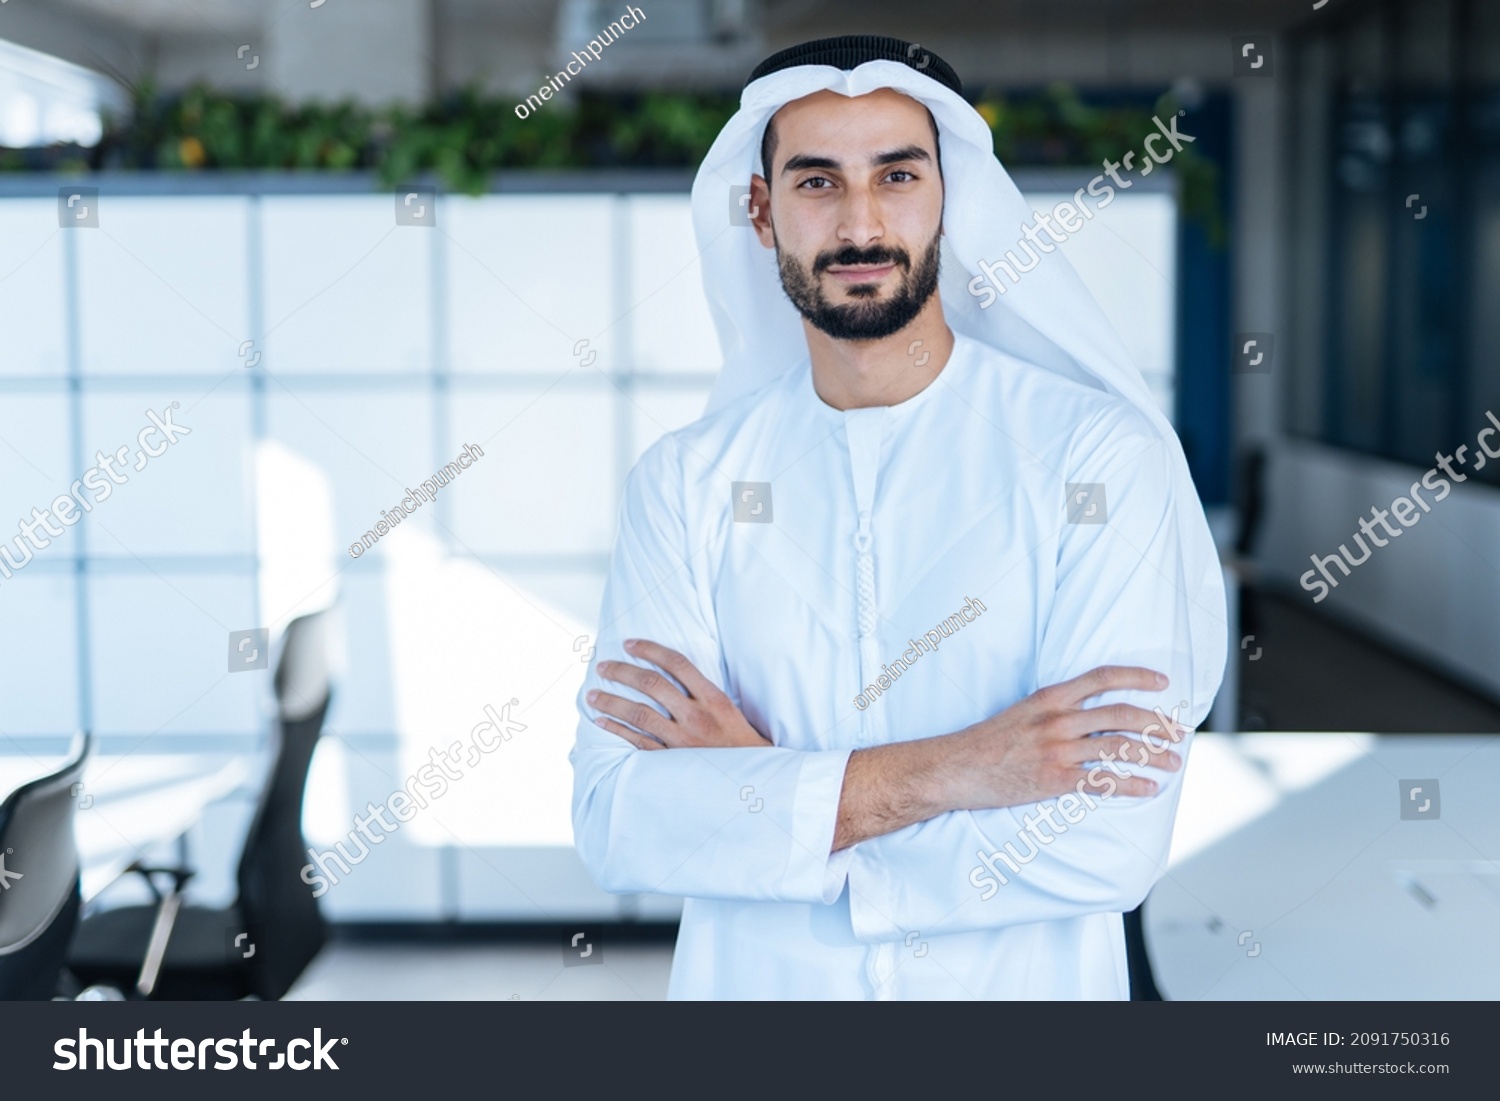 Handsome man with dish dasha working in his business office of Dubai. Portraits of a successful businessman in traditional emirates white dress. Concept about middle eastern cultures #2091750316